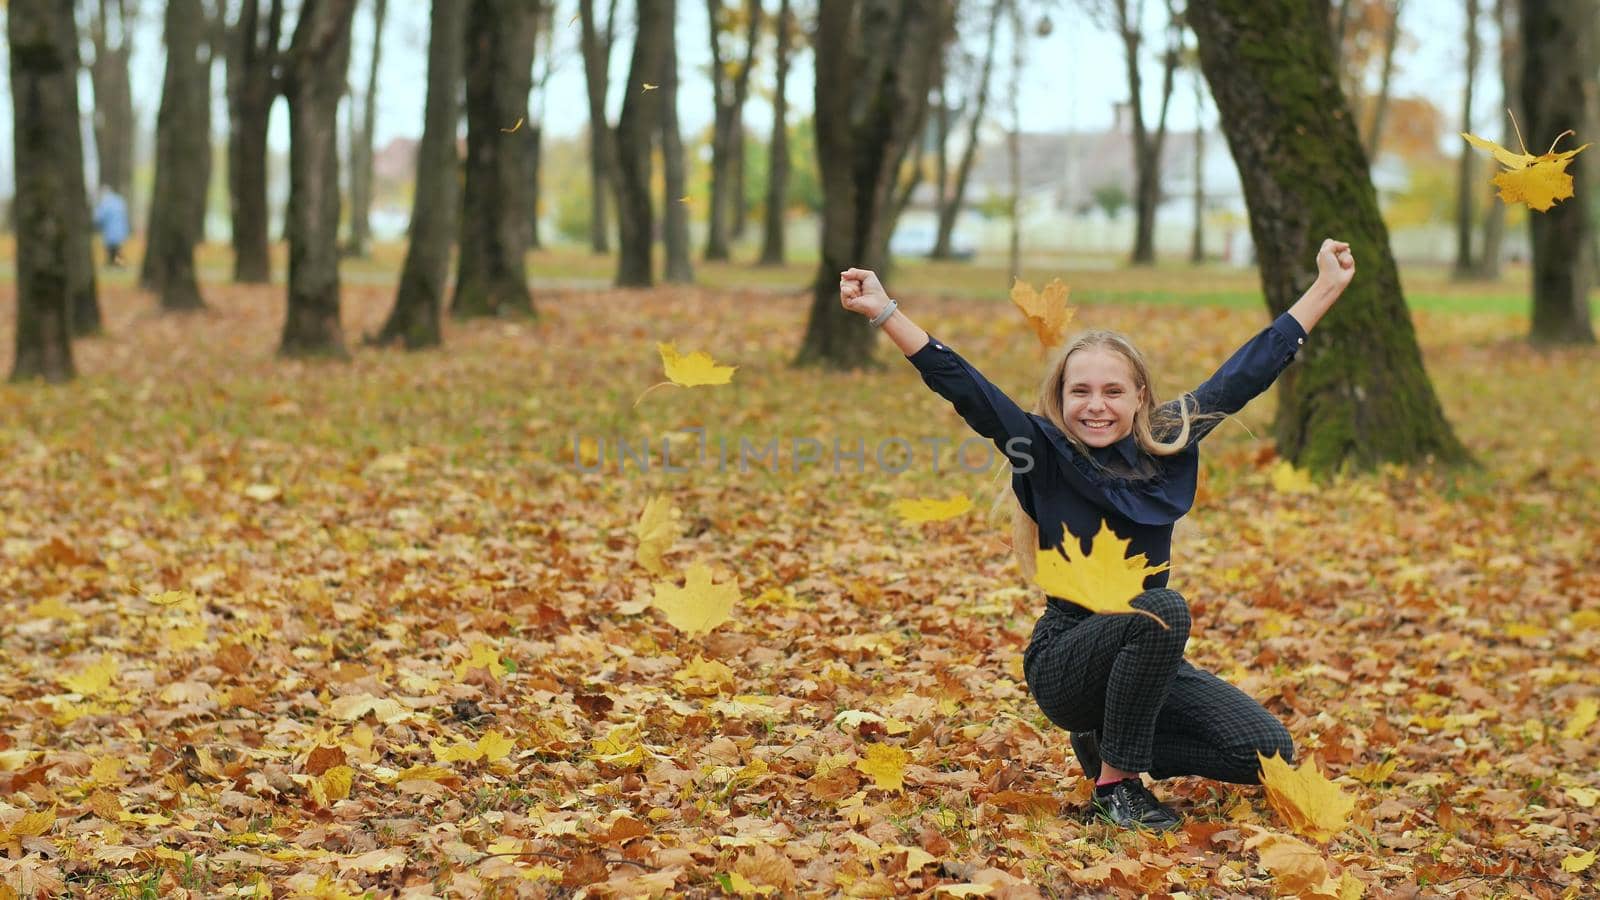 A young girl schoolgirl throws autumn leaves in a city park. Slow motion. by DovidPro